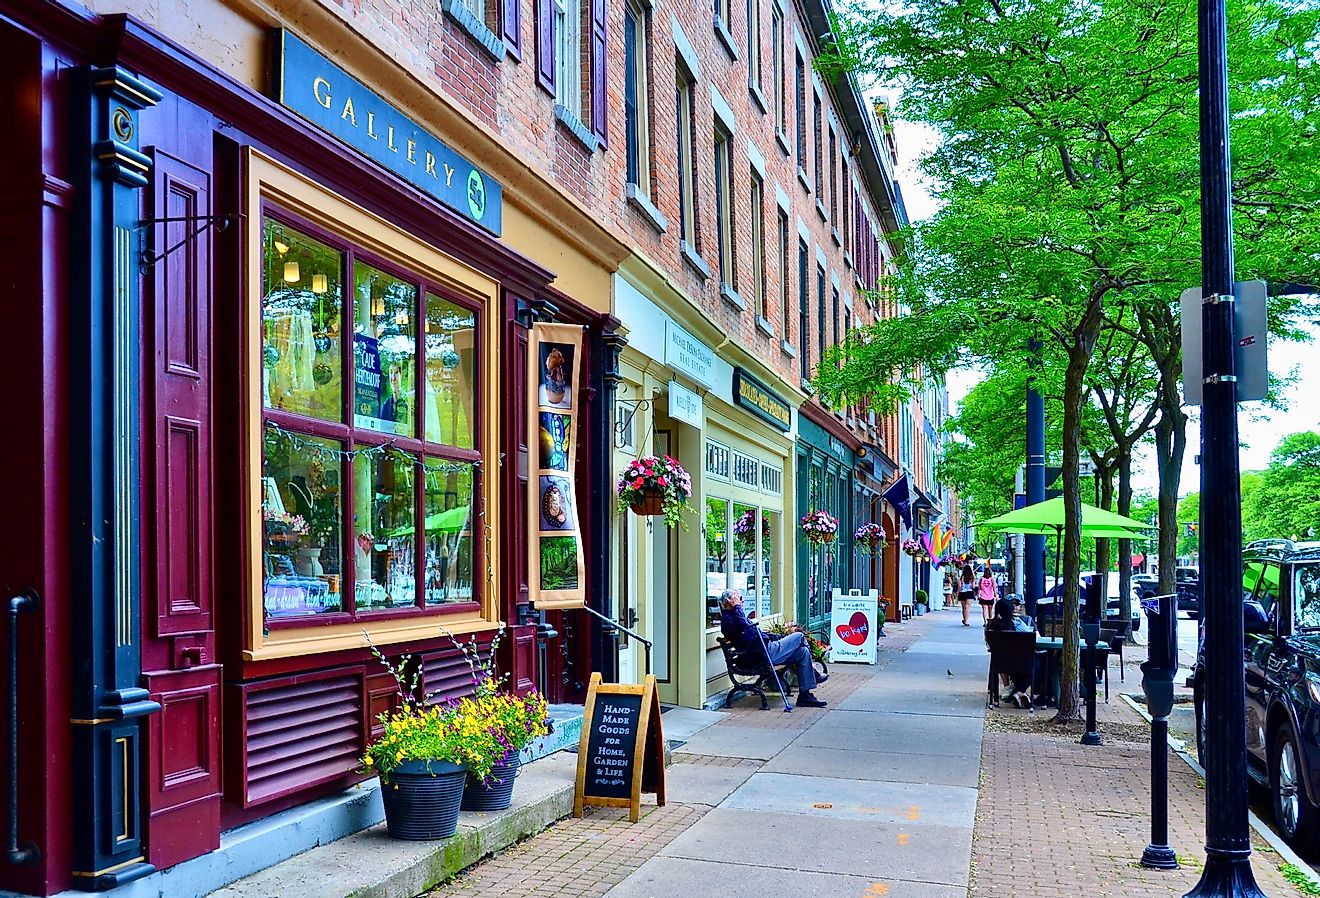 Street view at Skaneateles, a charming lakeside hideaway oozes small-town life in summer. Image credit PQK via Shutterstock